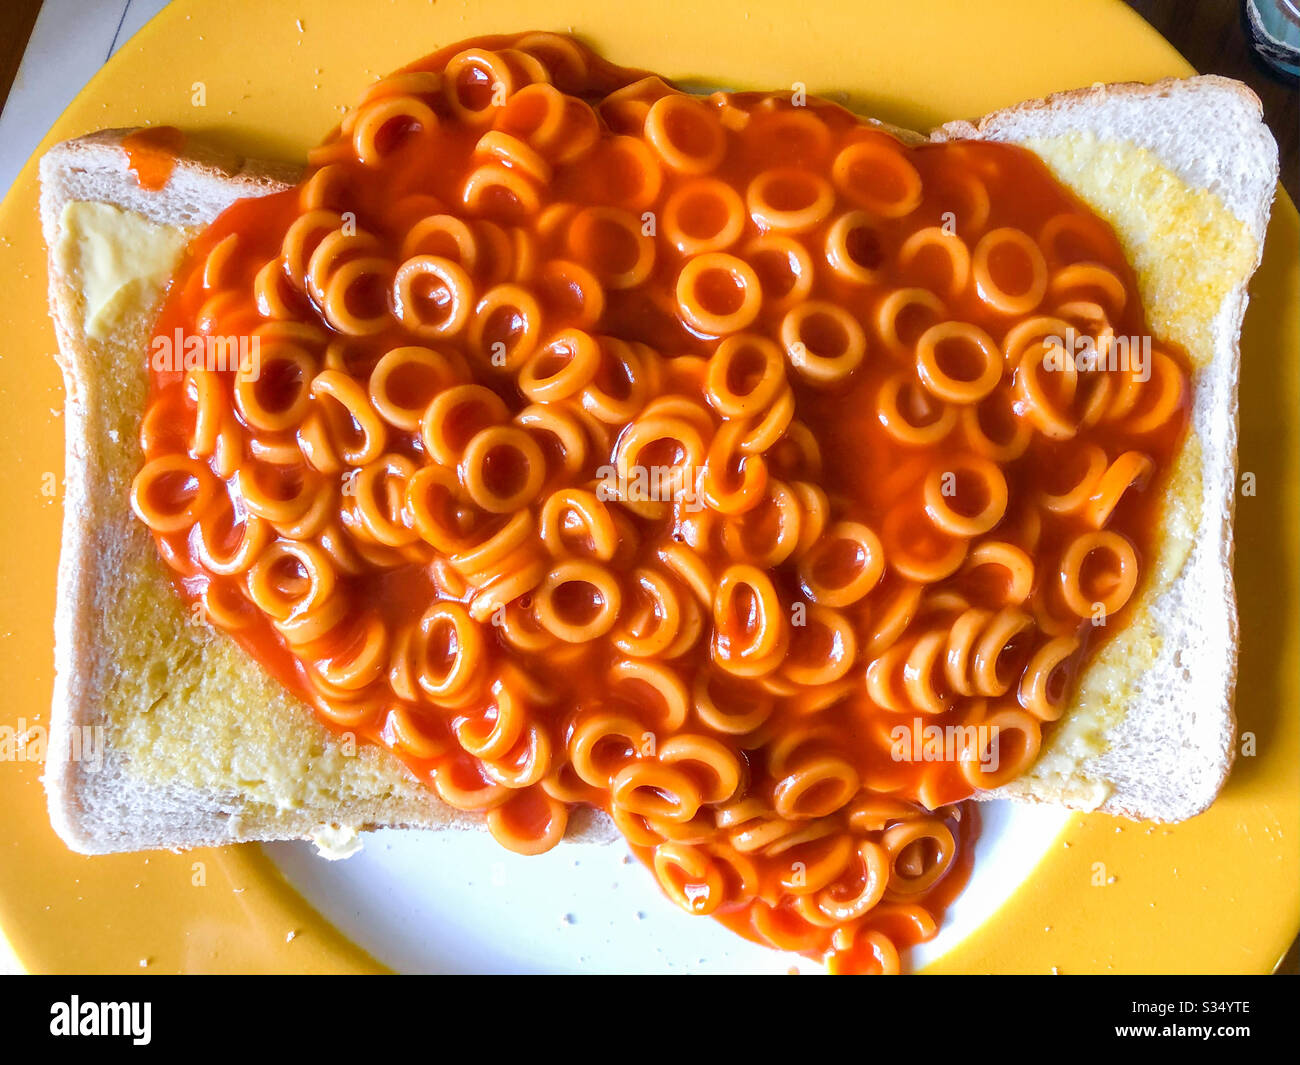 Spaghetti rings in tomato sauce on buttered toast Stock Photo - Alamy